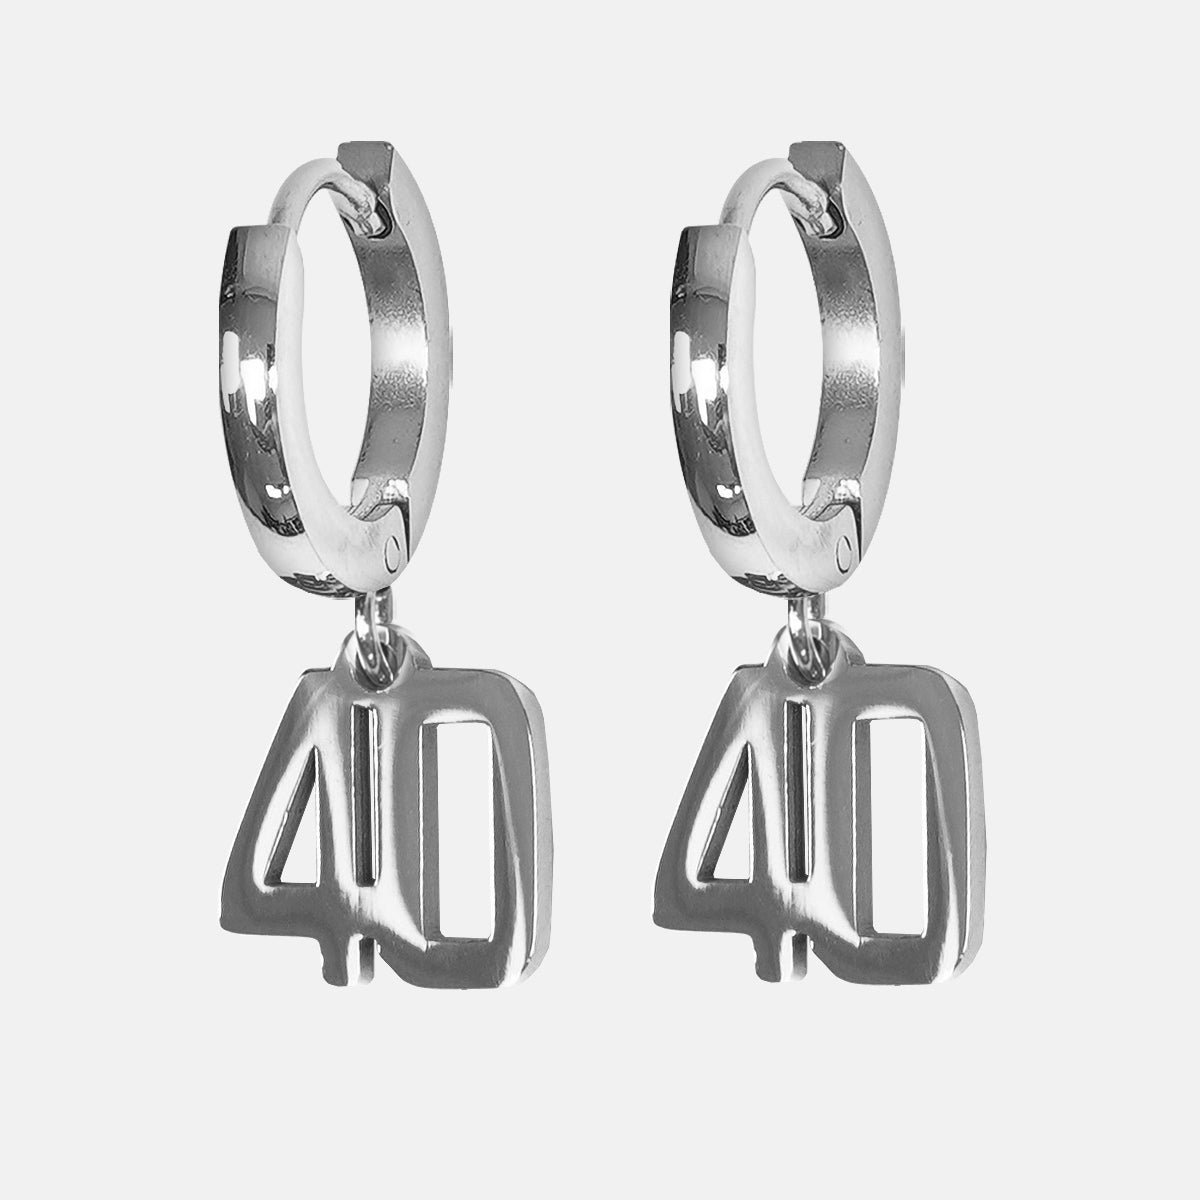 40 Number Earring - Stainless Steel